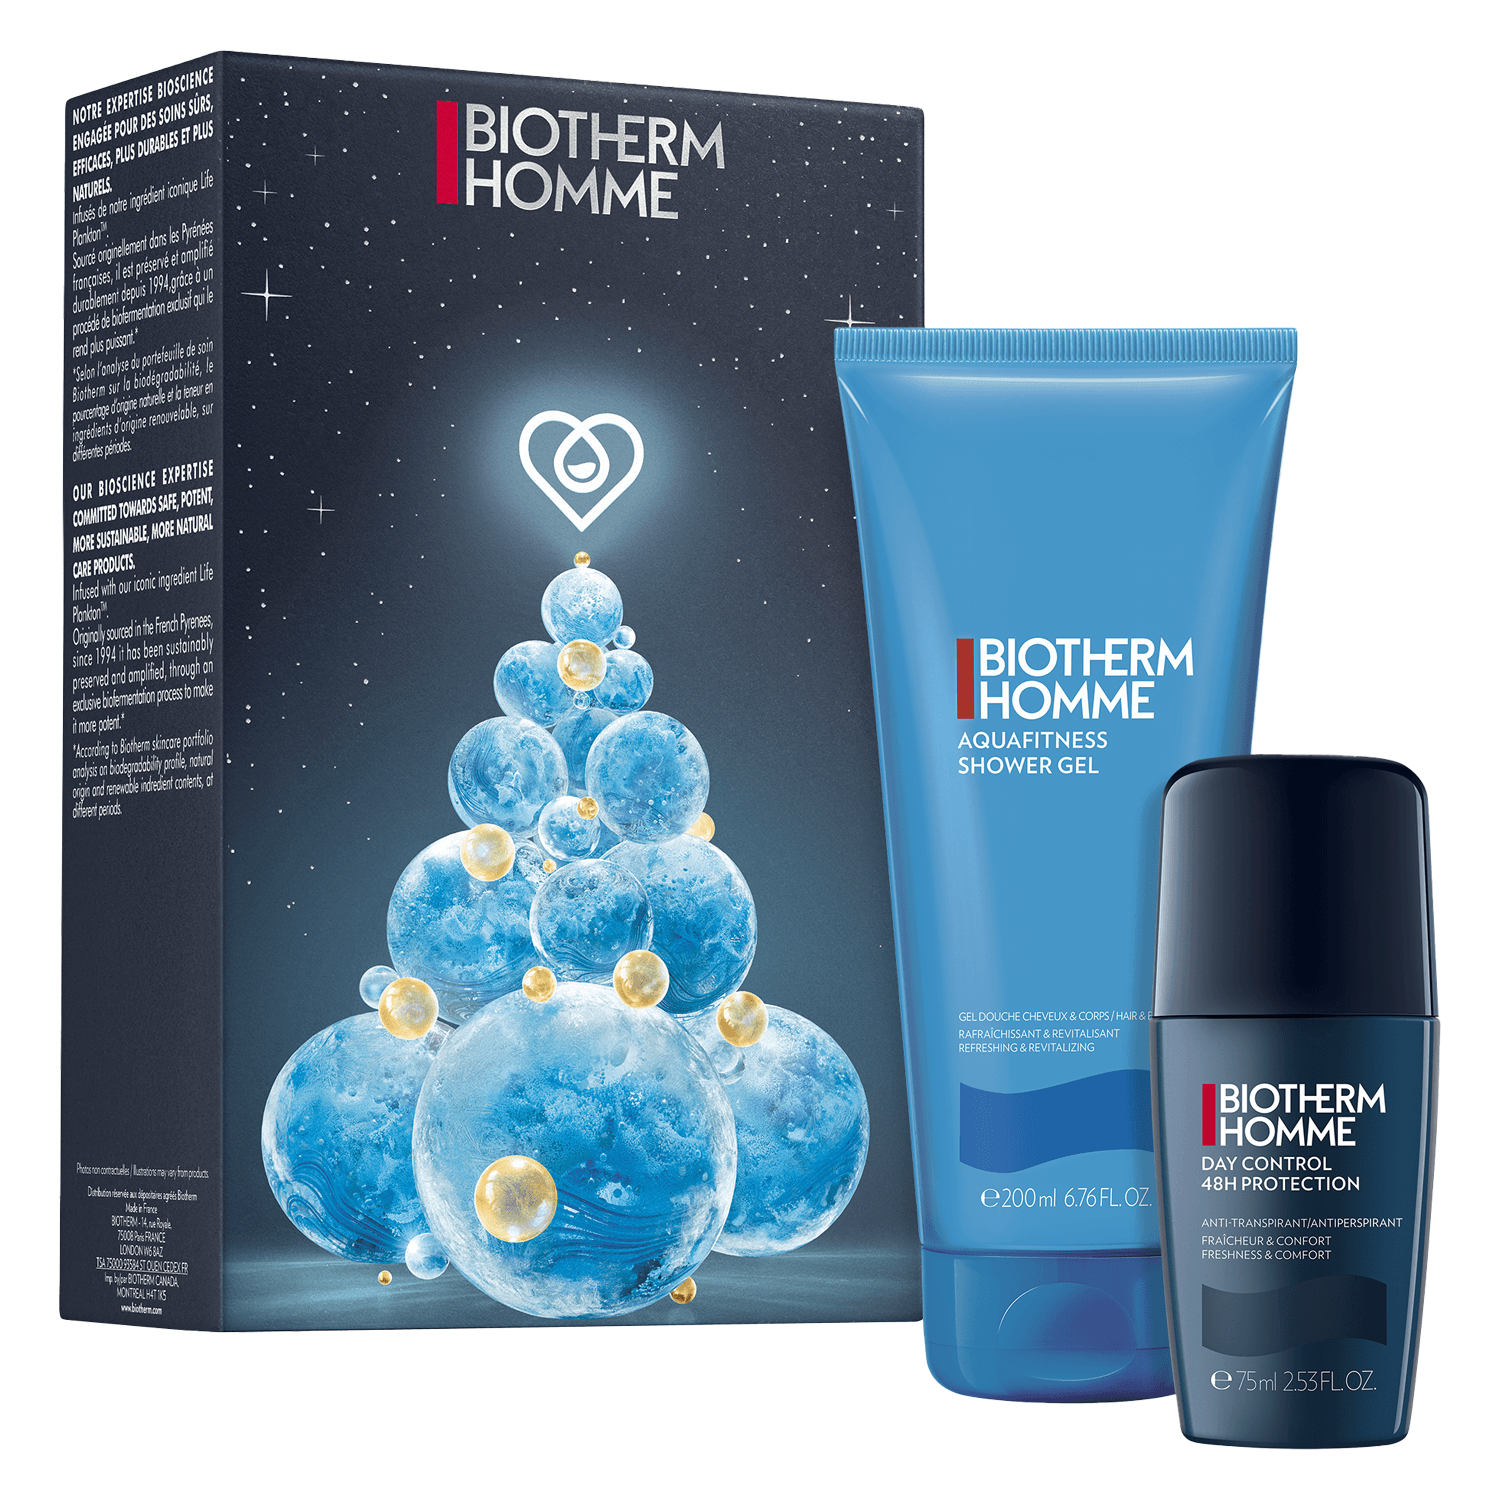 Product image from Biotherm Specials - Aquafitness Kit